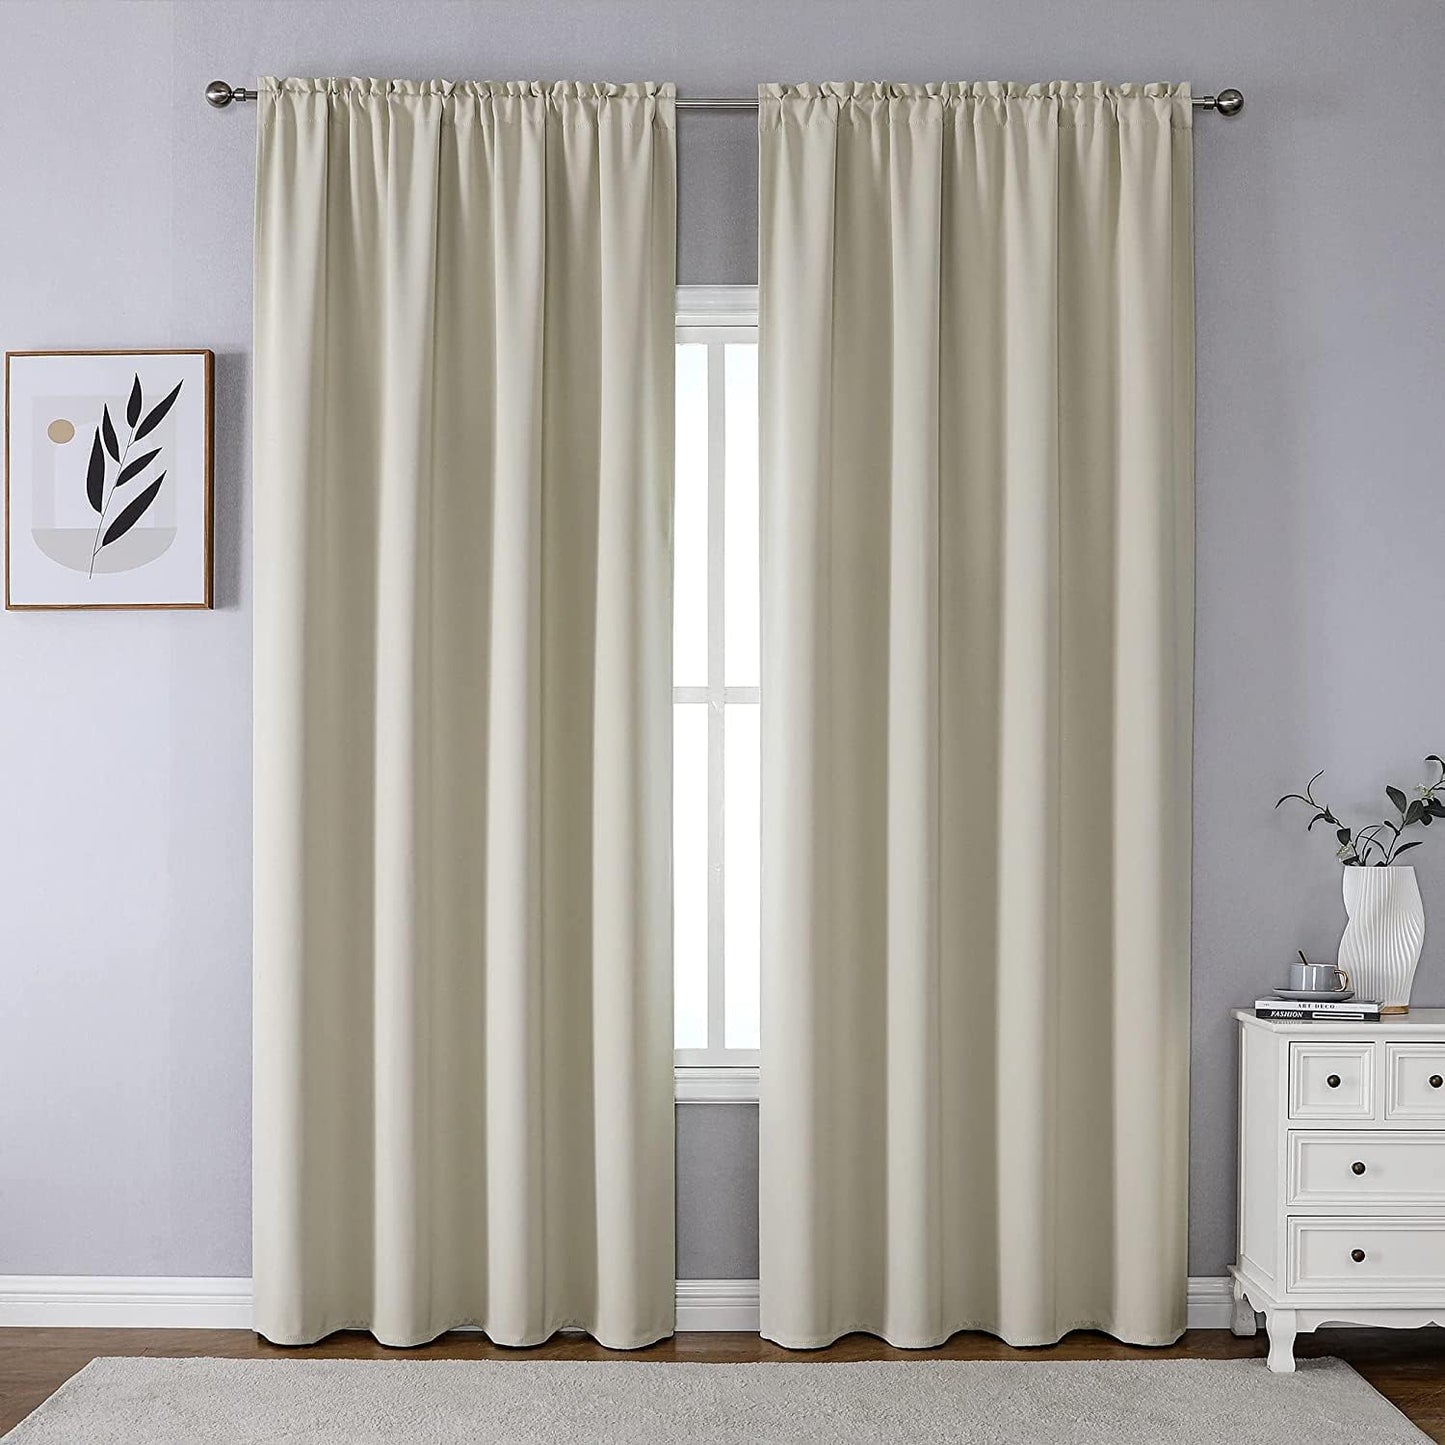 CUCRAF Blackout Curtains 84 Inches Long for Living Room, Light Beige Room Darkening Window Curtain Panels, Rod Pocket Thermal Insulated Solid Drapes for Bedroom, 52X84 Inch, Set of 2 Panels  CUCRAF Light Beige 52W X 90L Inch 2 Panels 